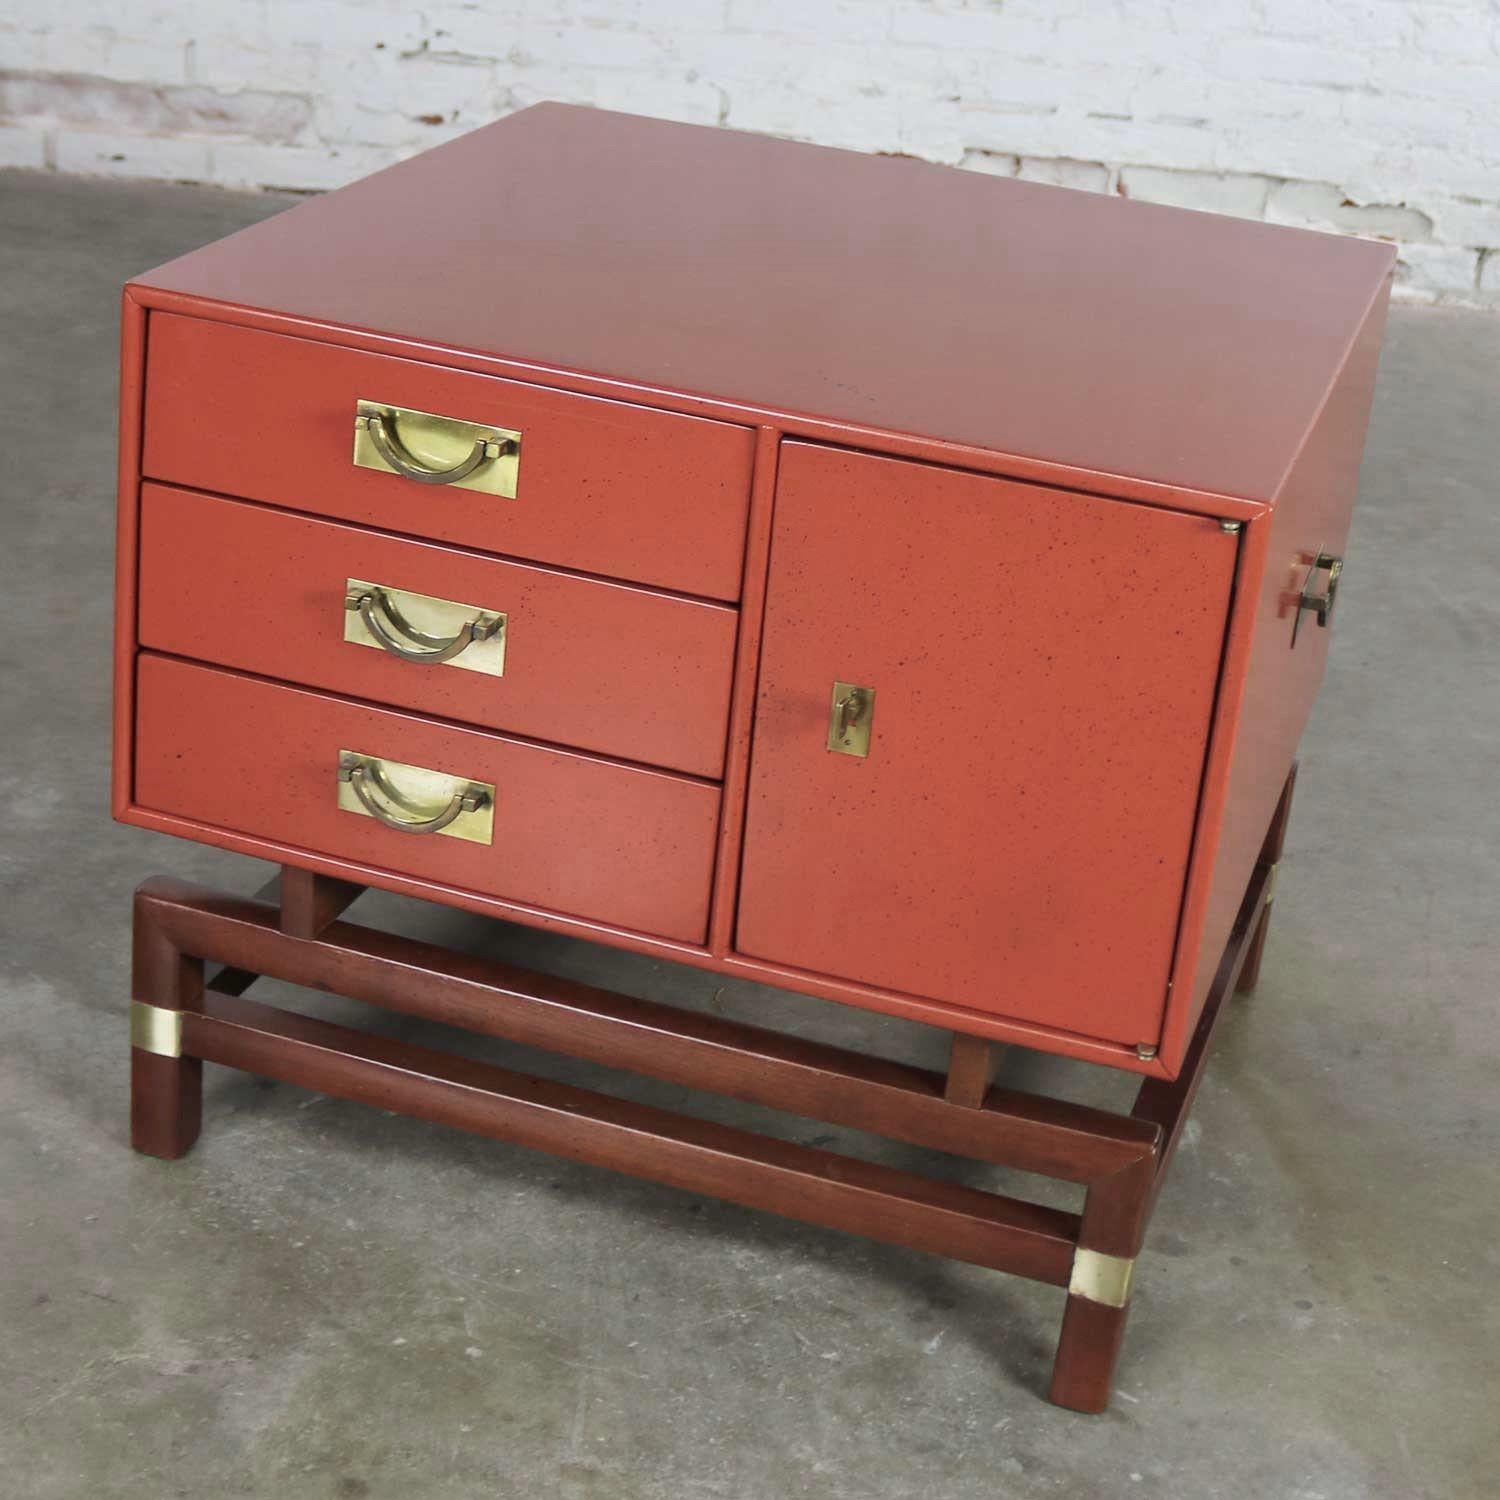 Incredible vintage Campaign style end or side table, maybe a nightstand, by Hickory Furniture Manufacturing. It is done in a gorgeous Chinese red finish for the box and stained butternut for the base with beautiful brass accents. It is in fabulous